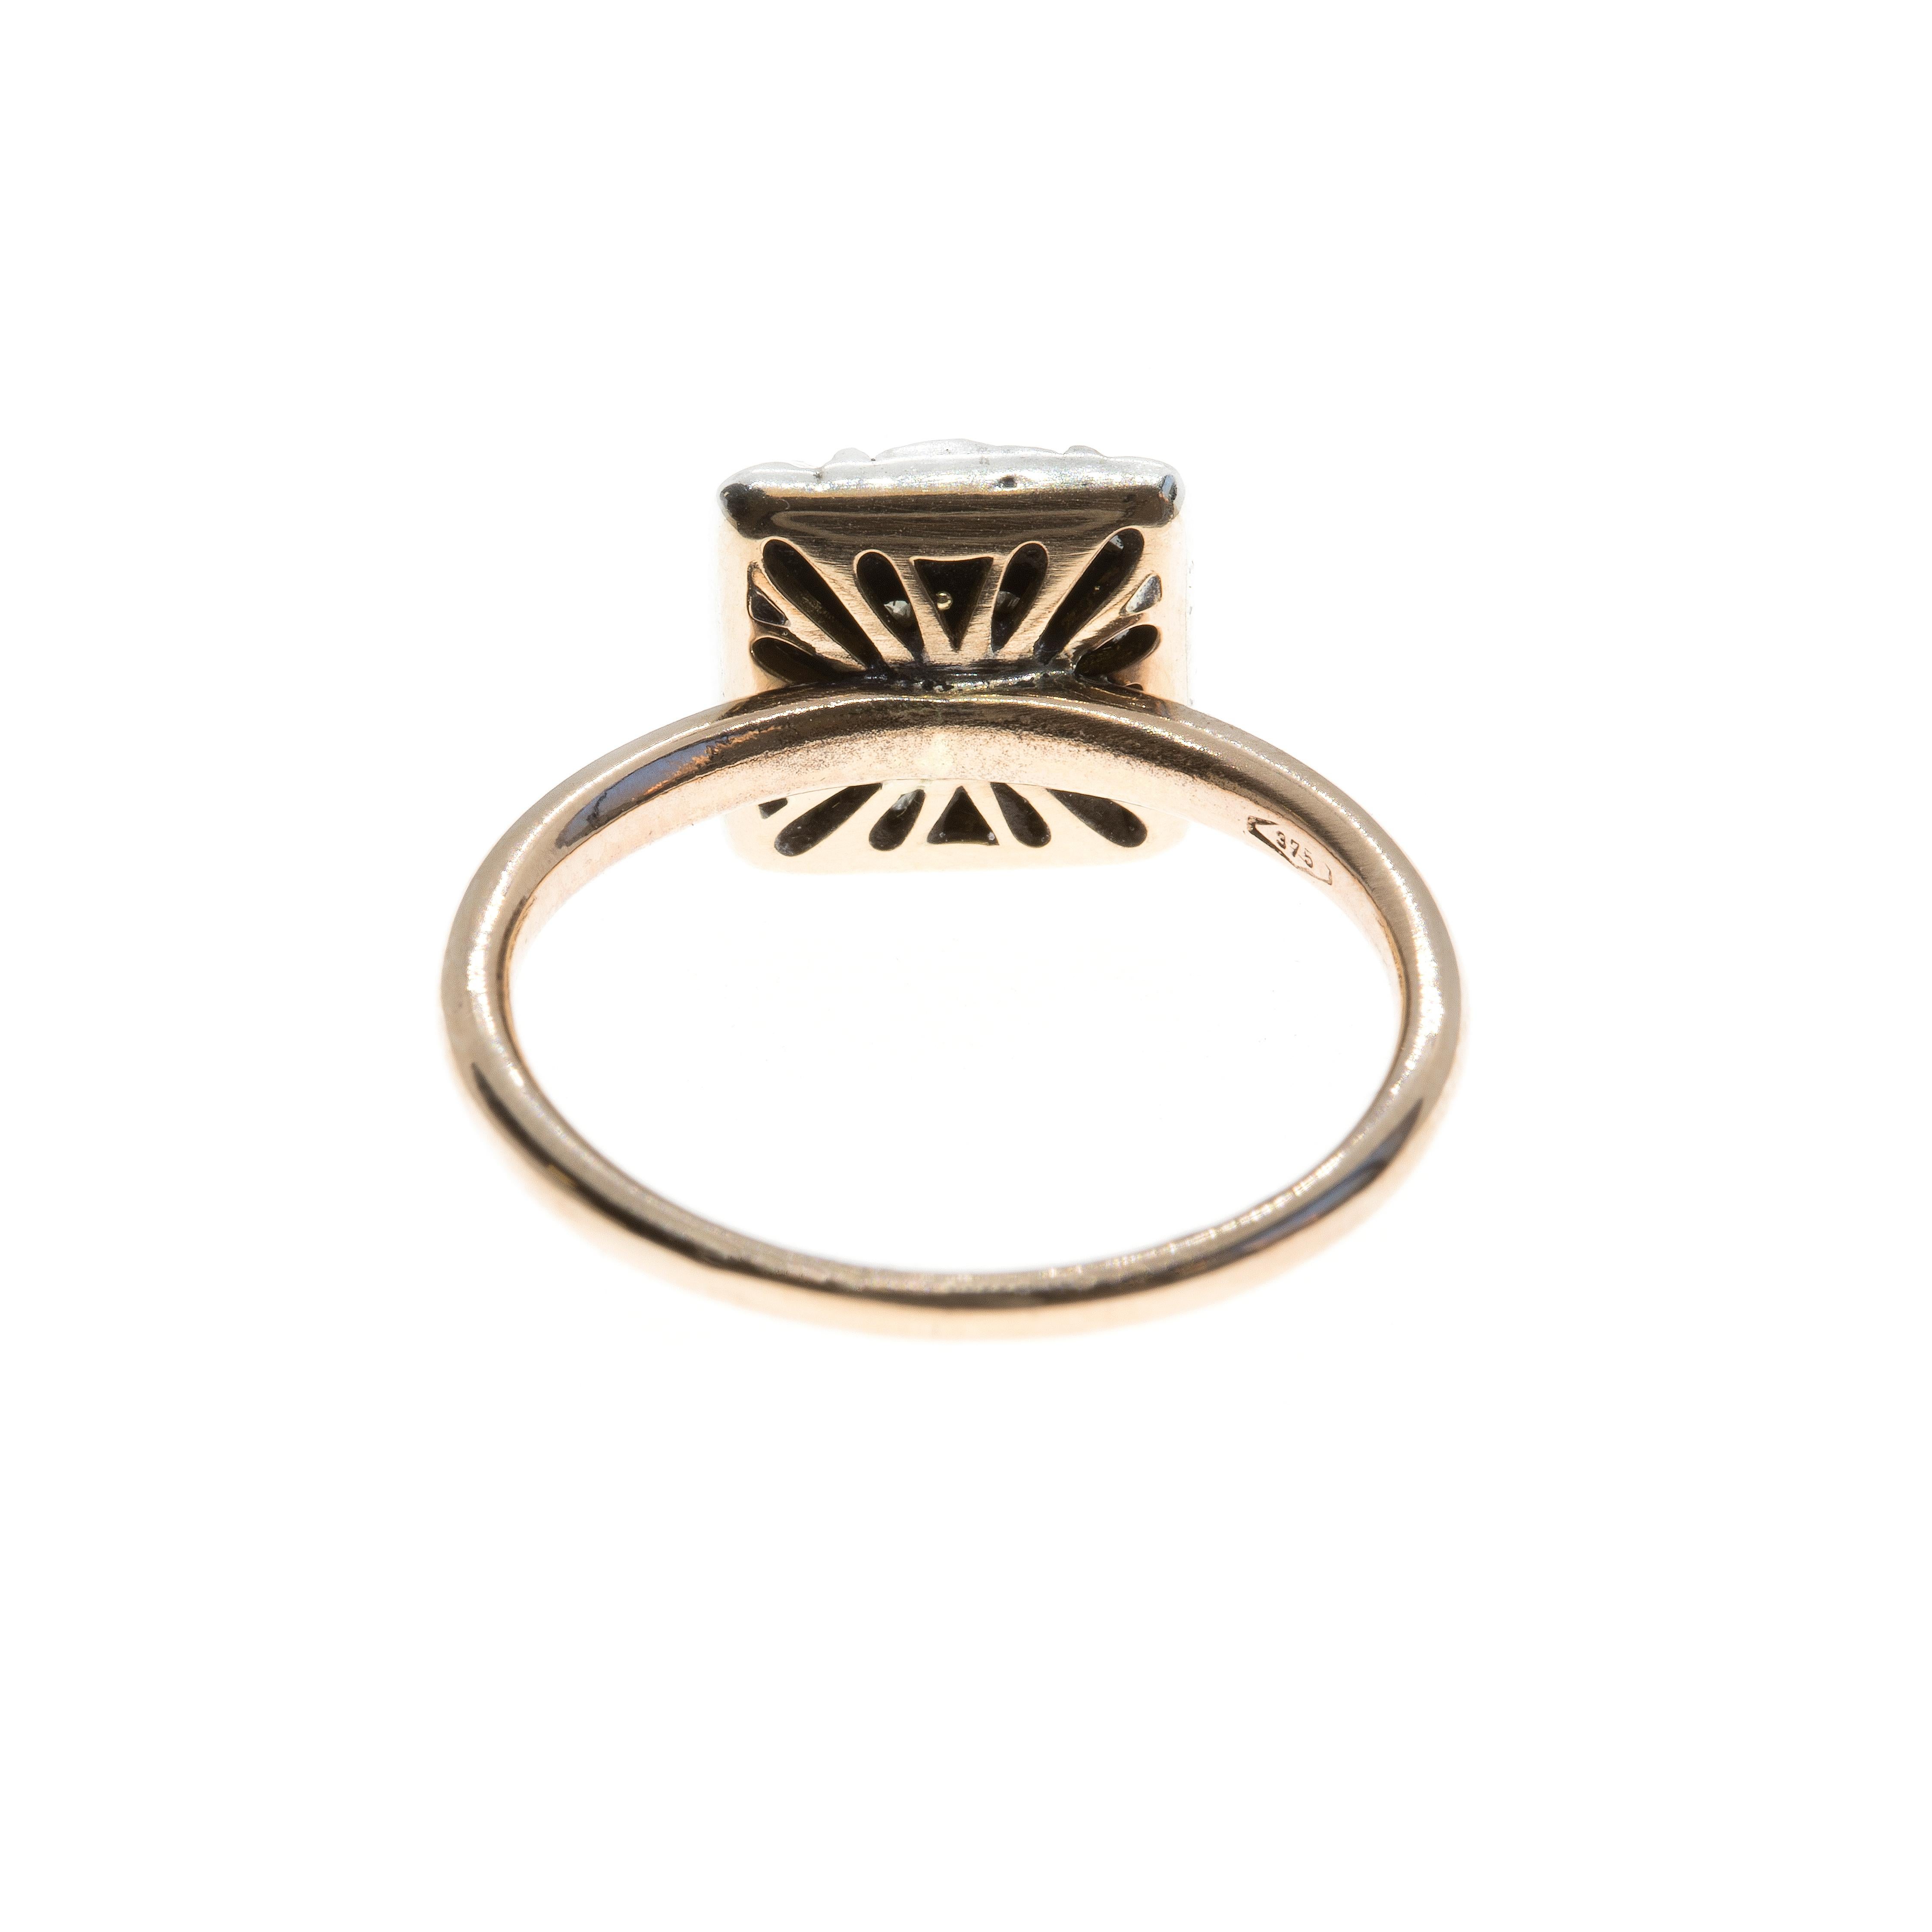 Contemporary 21st Century 9 Karat Rose Gold and Diamond Square Cesellato Cocktail Ring